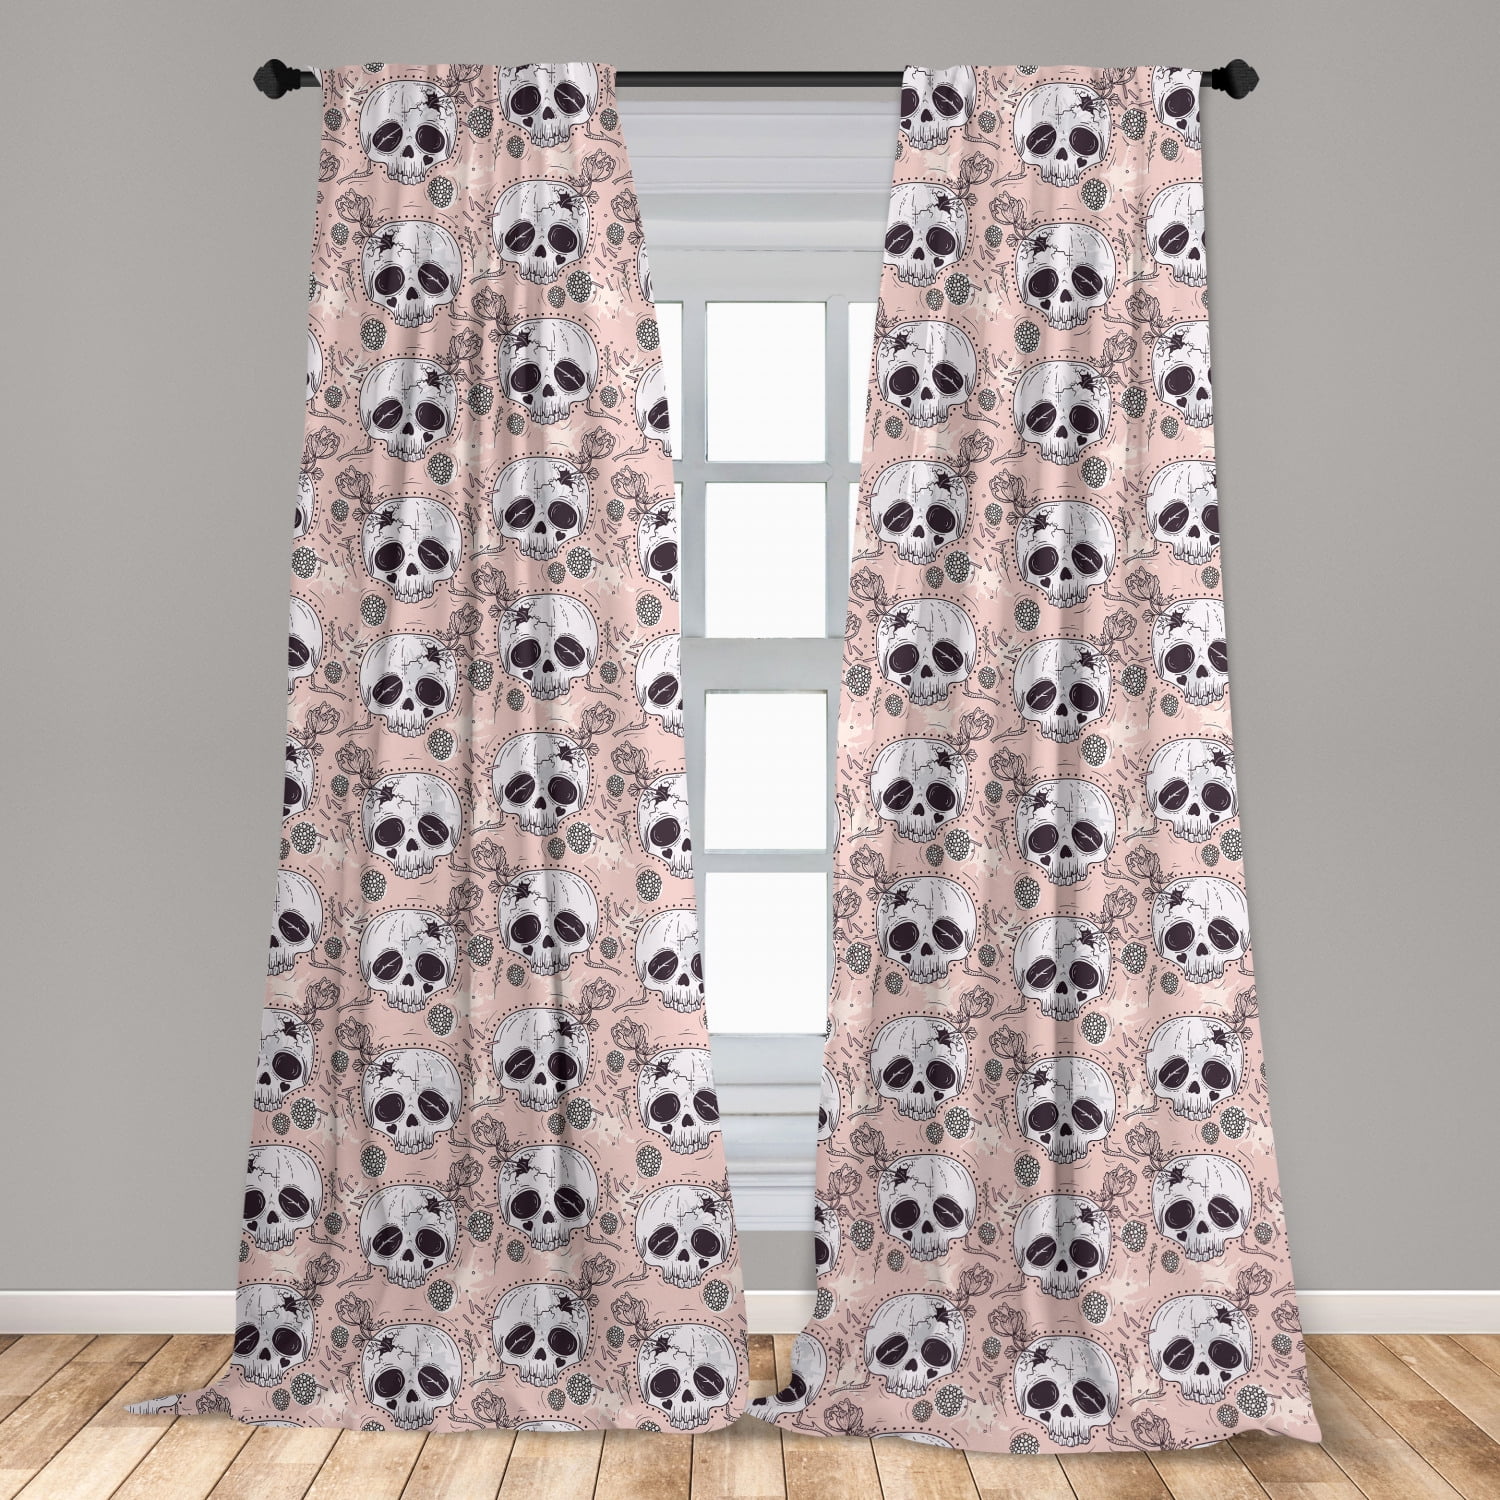 Black Decor for Bedroom Living Room Kitchen Office Halloween Scary Skull Skeleton Window Curtain Treatment Drapes 2 Panles Set with Grommet Top